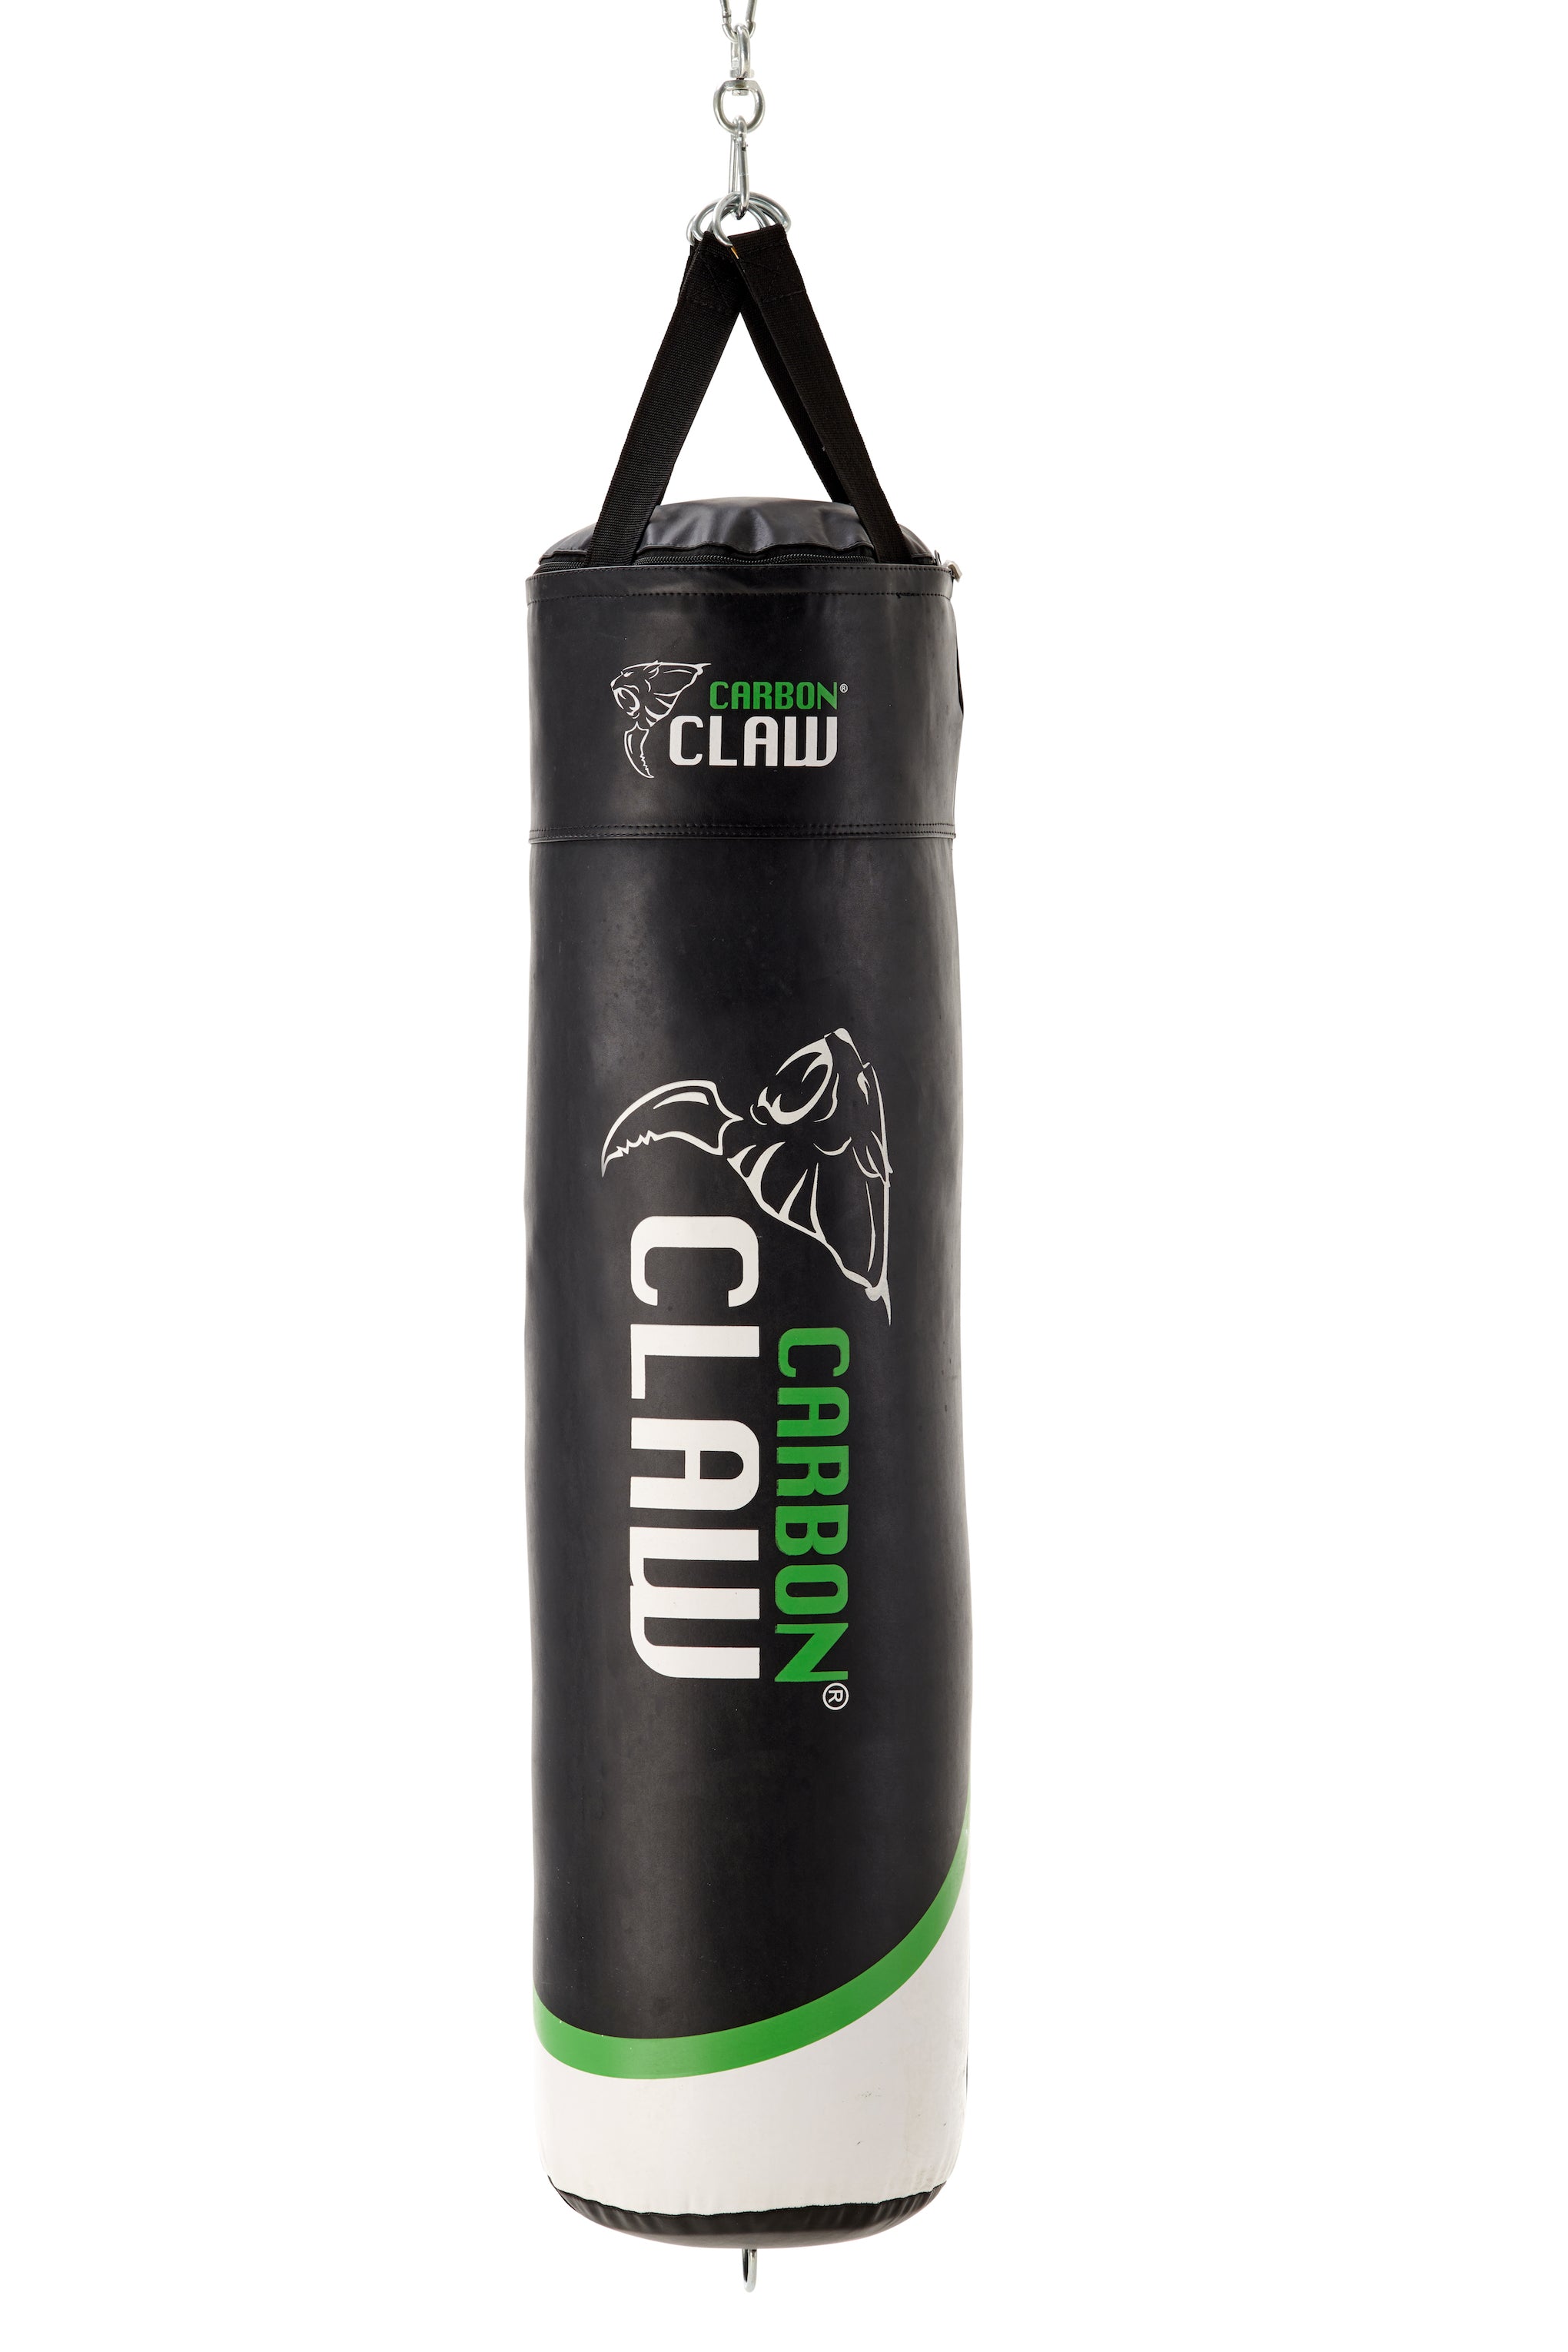 Image of CARBON CLAW ARMA AX-5 SERIES 4FT PUNCH BAG 27kg